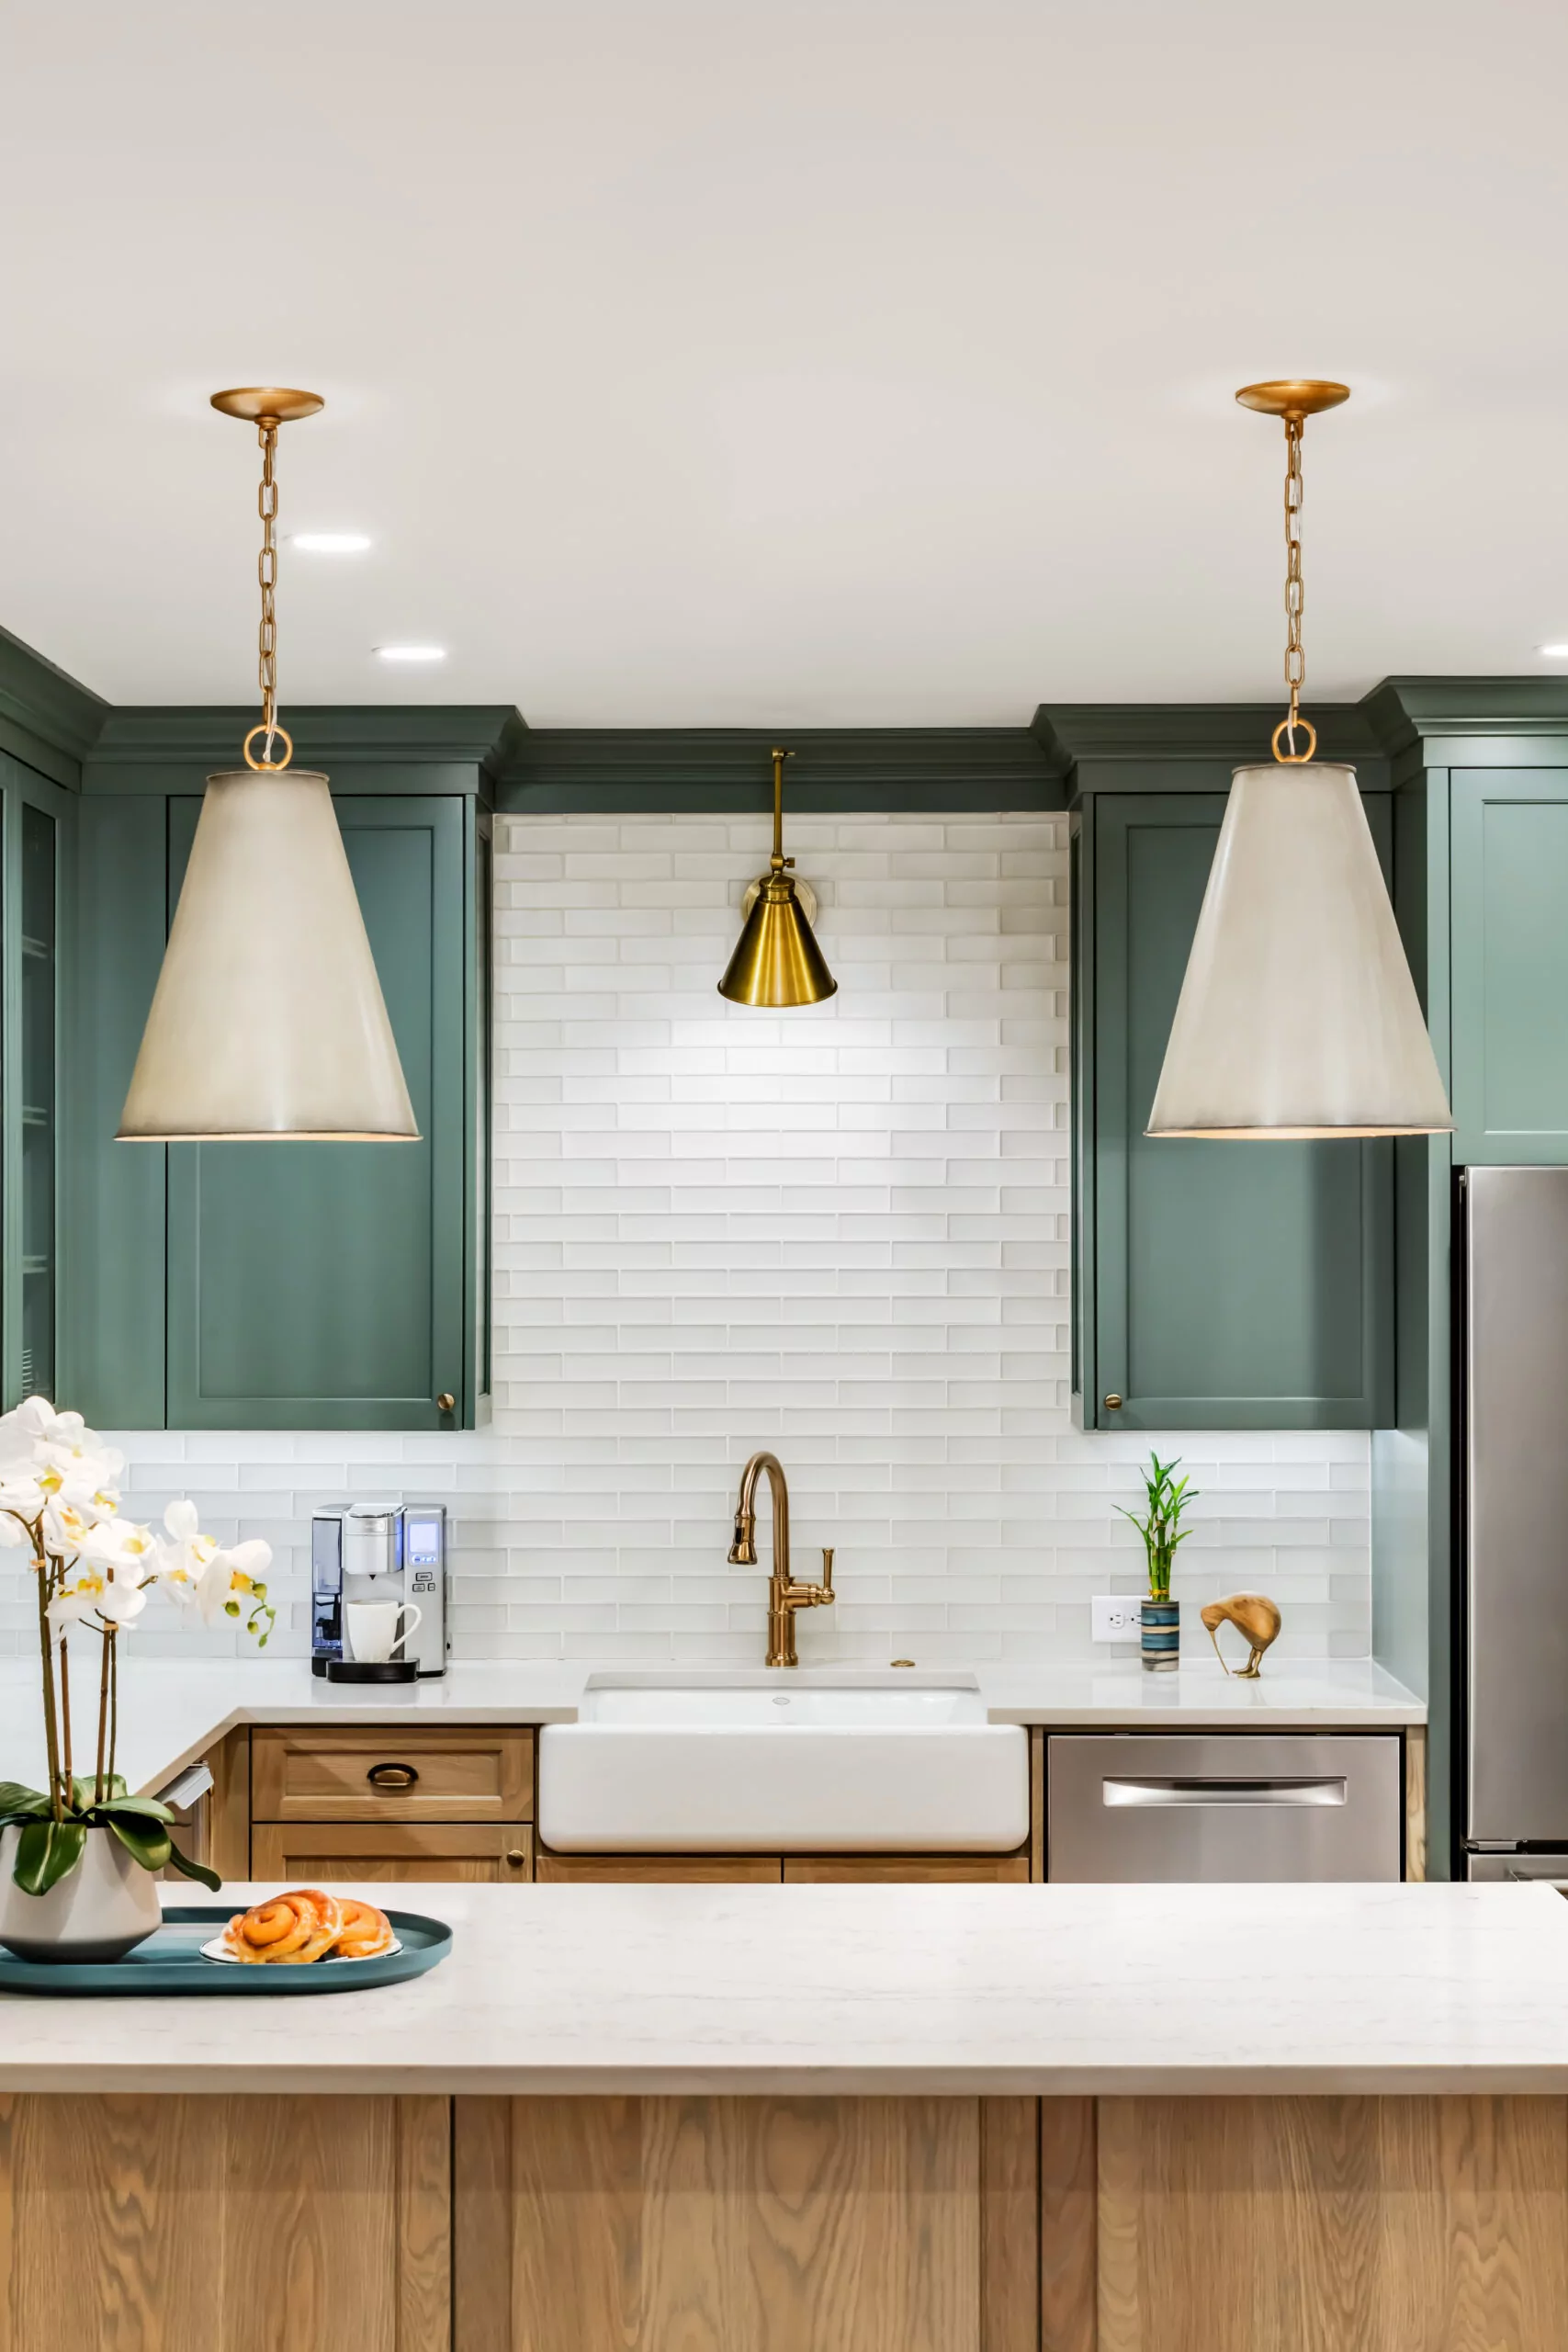 great kitchen and cabinet combinations green and white glass